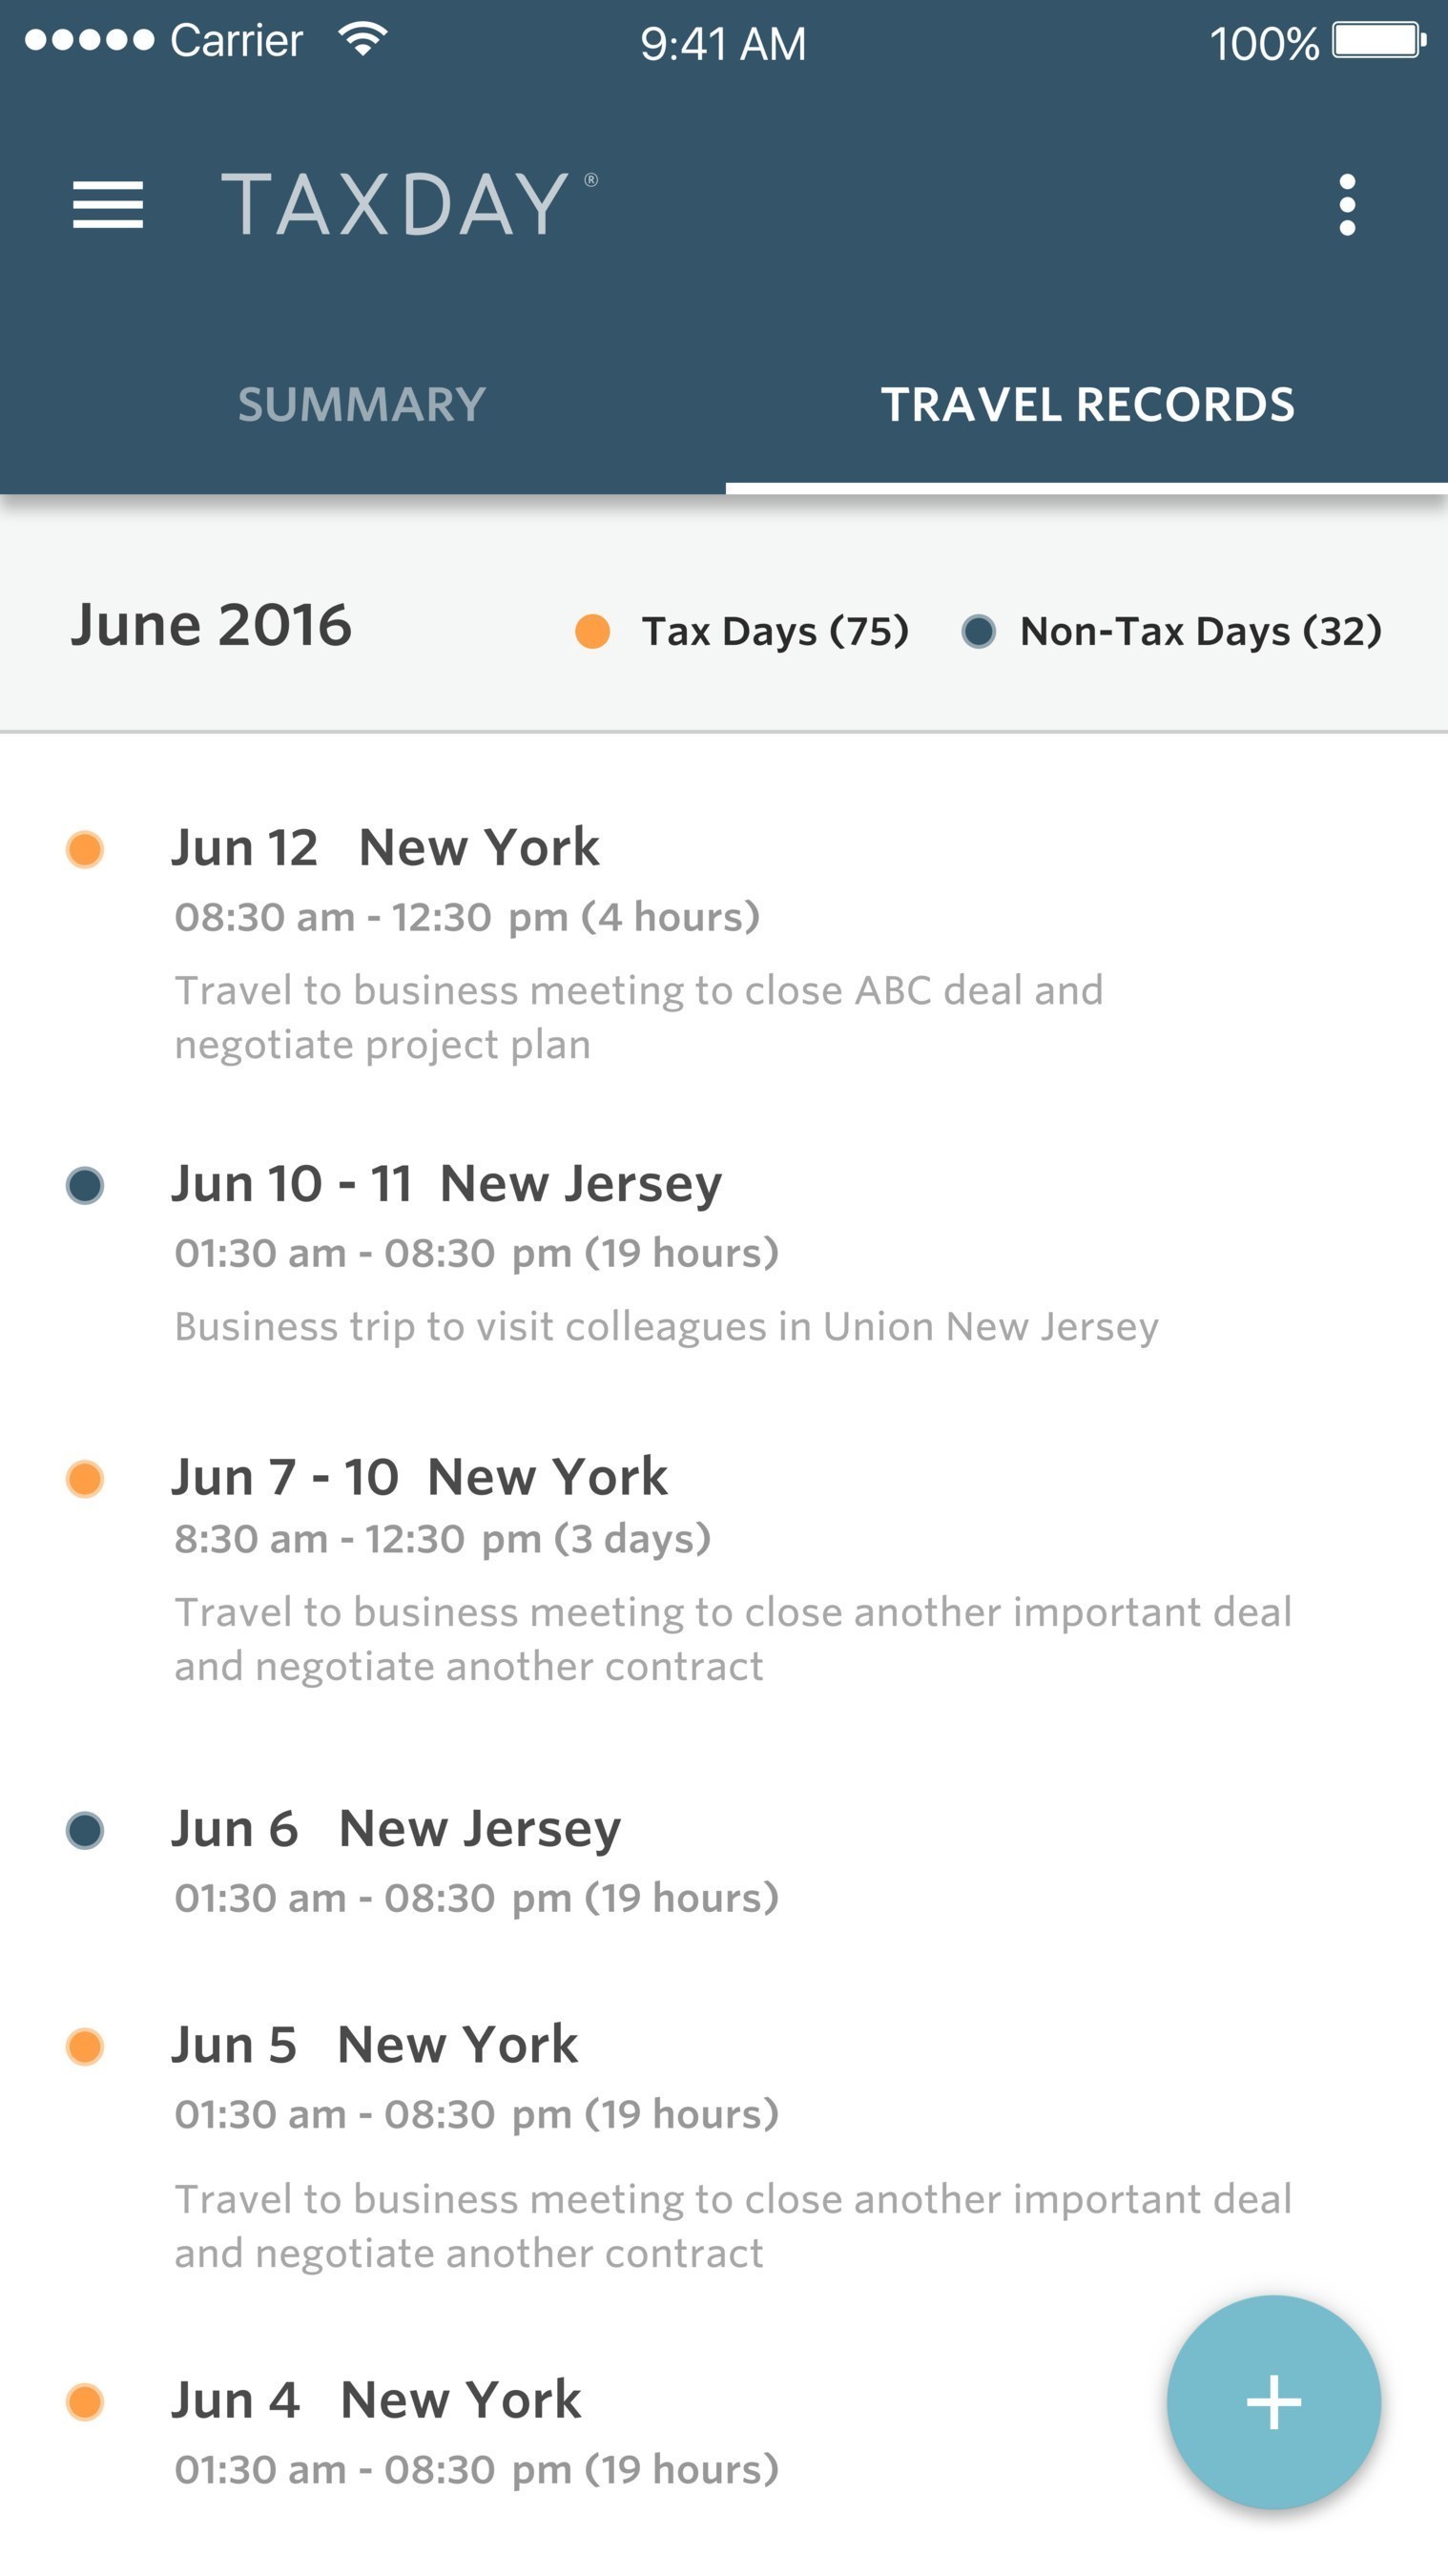 Provides a chronological record in TaxDay, with user descriptions, of all travel by State, indicating which days count toward taxable versus non-taxable days.